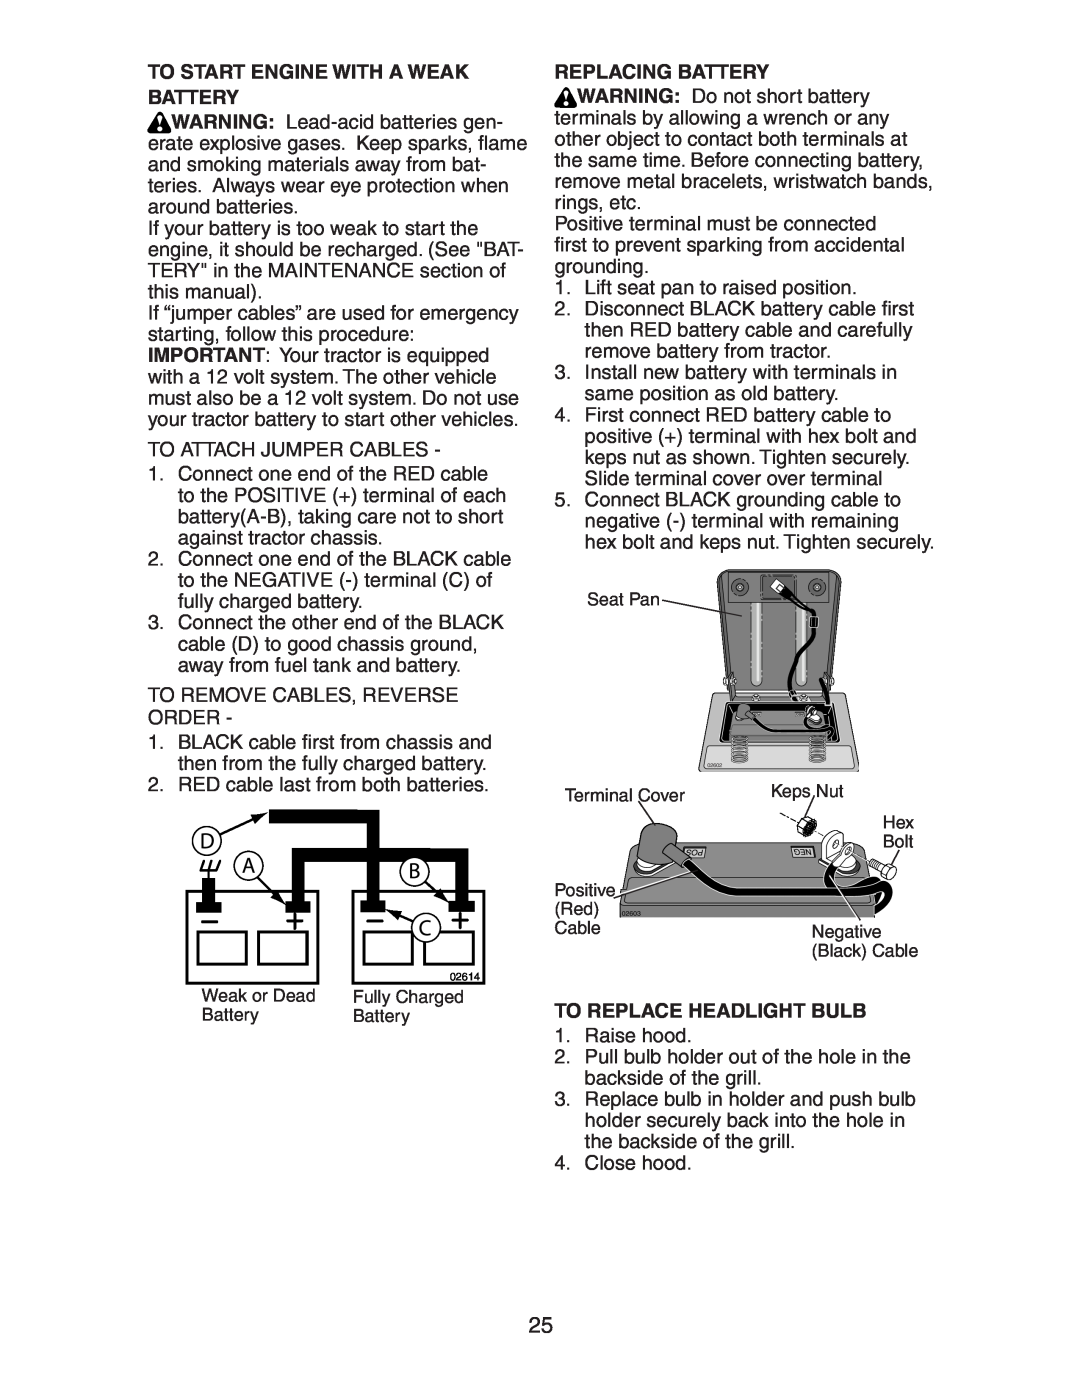 Poulan AG17542STB manual To Start Engine With A Weak Battery, Replacing Battery, To Replace Headlight Bulb 